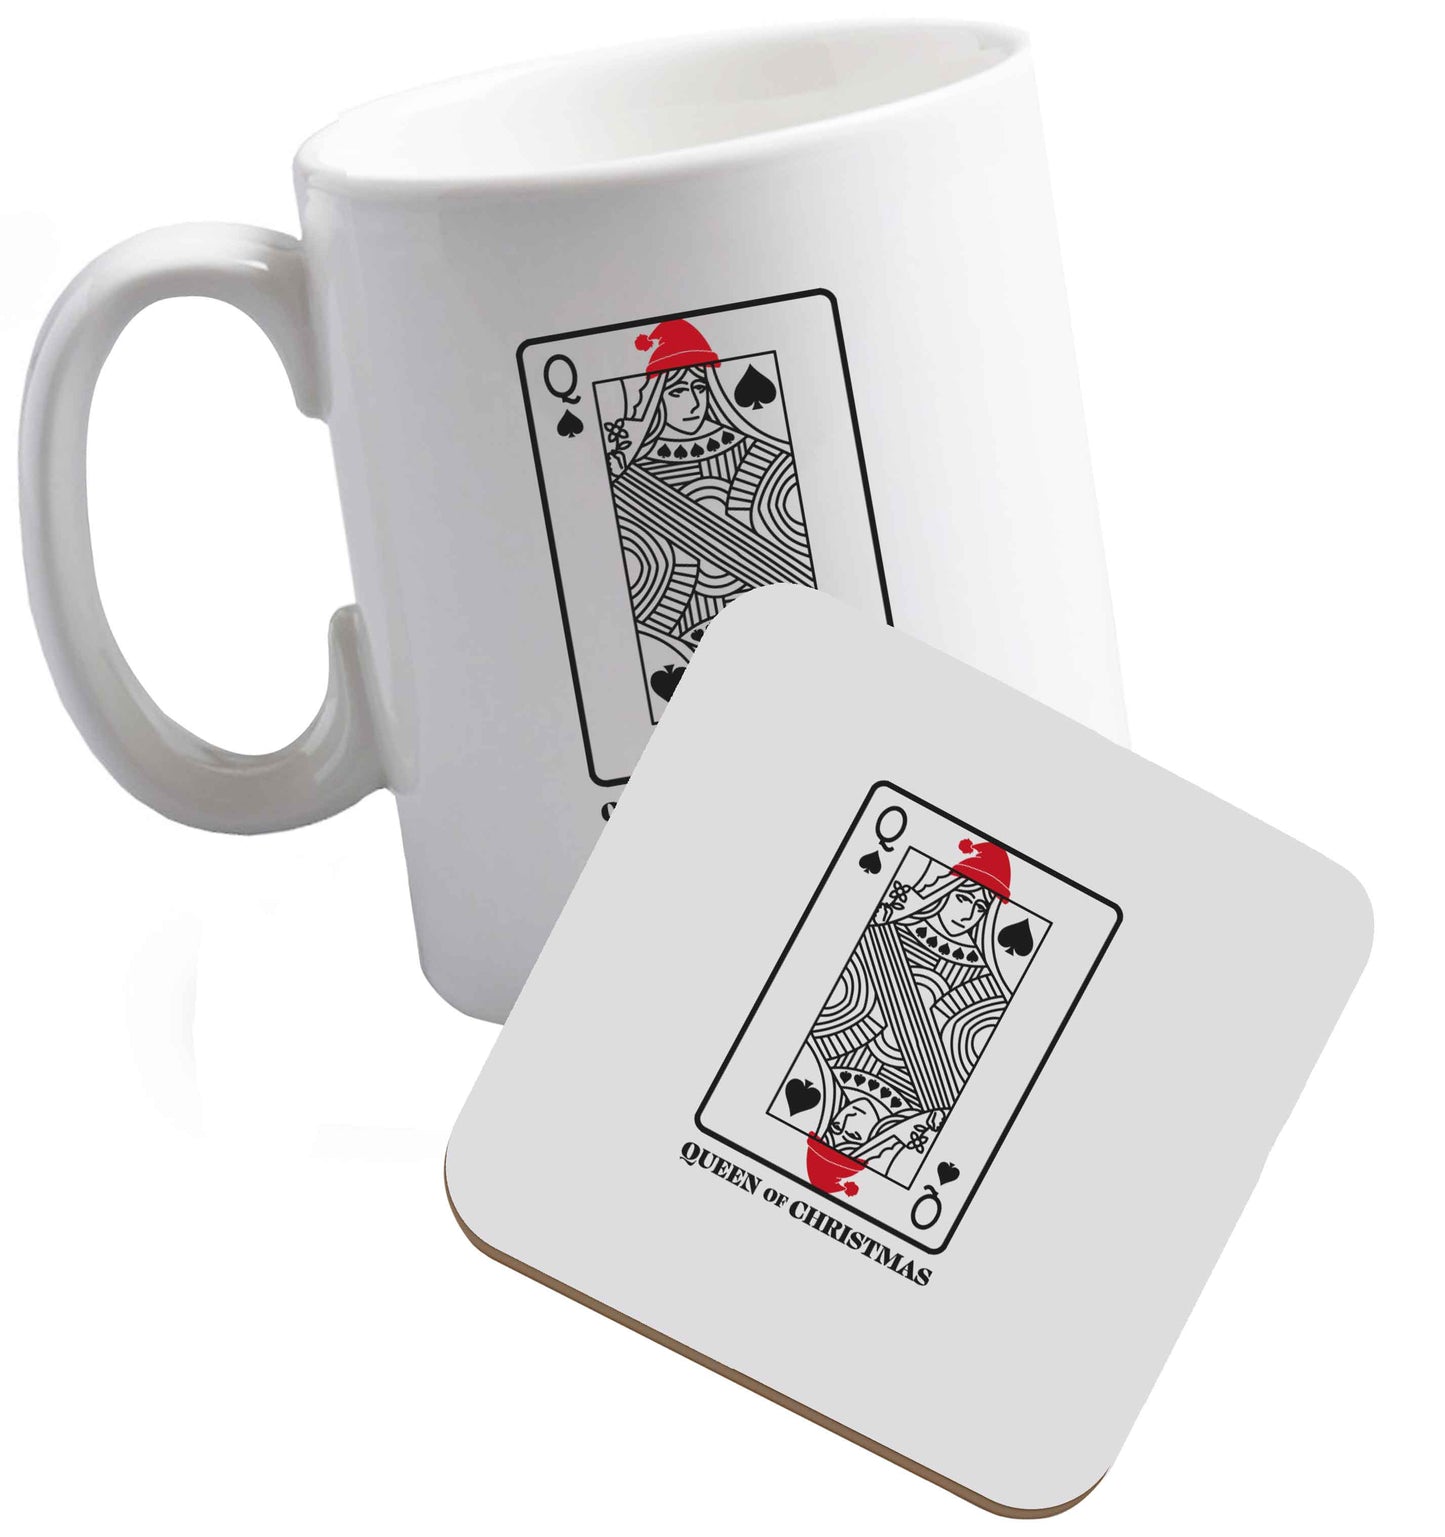 10 oz Queen of christmas ceramic mug and coaster set right handed